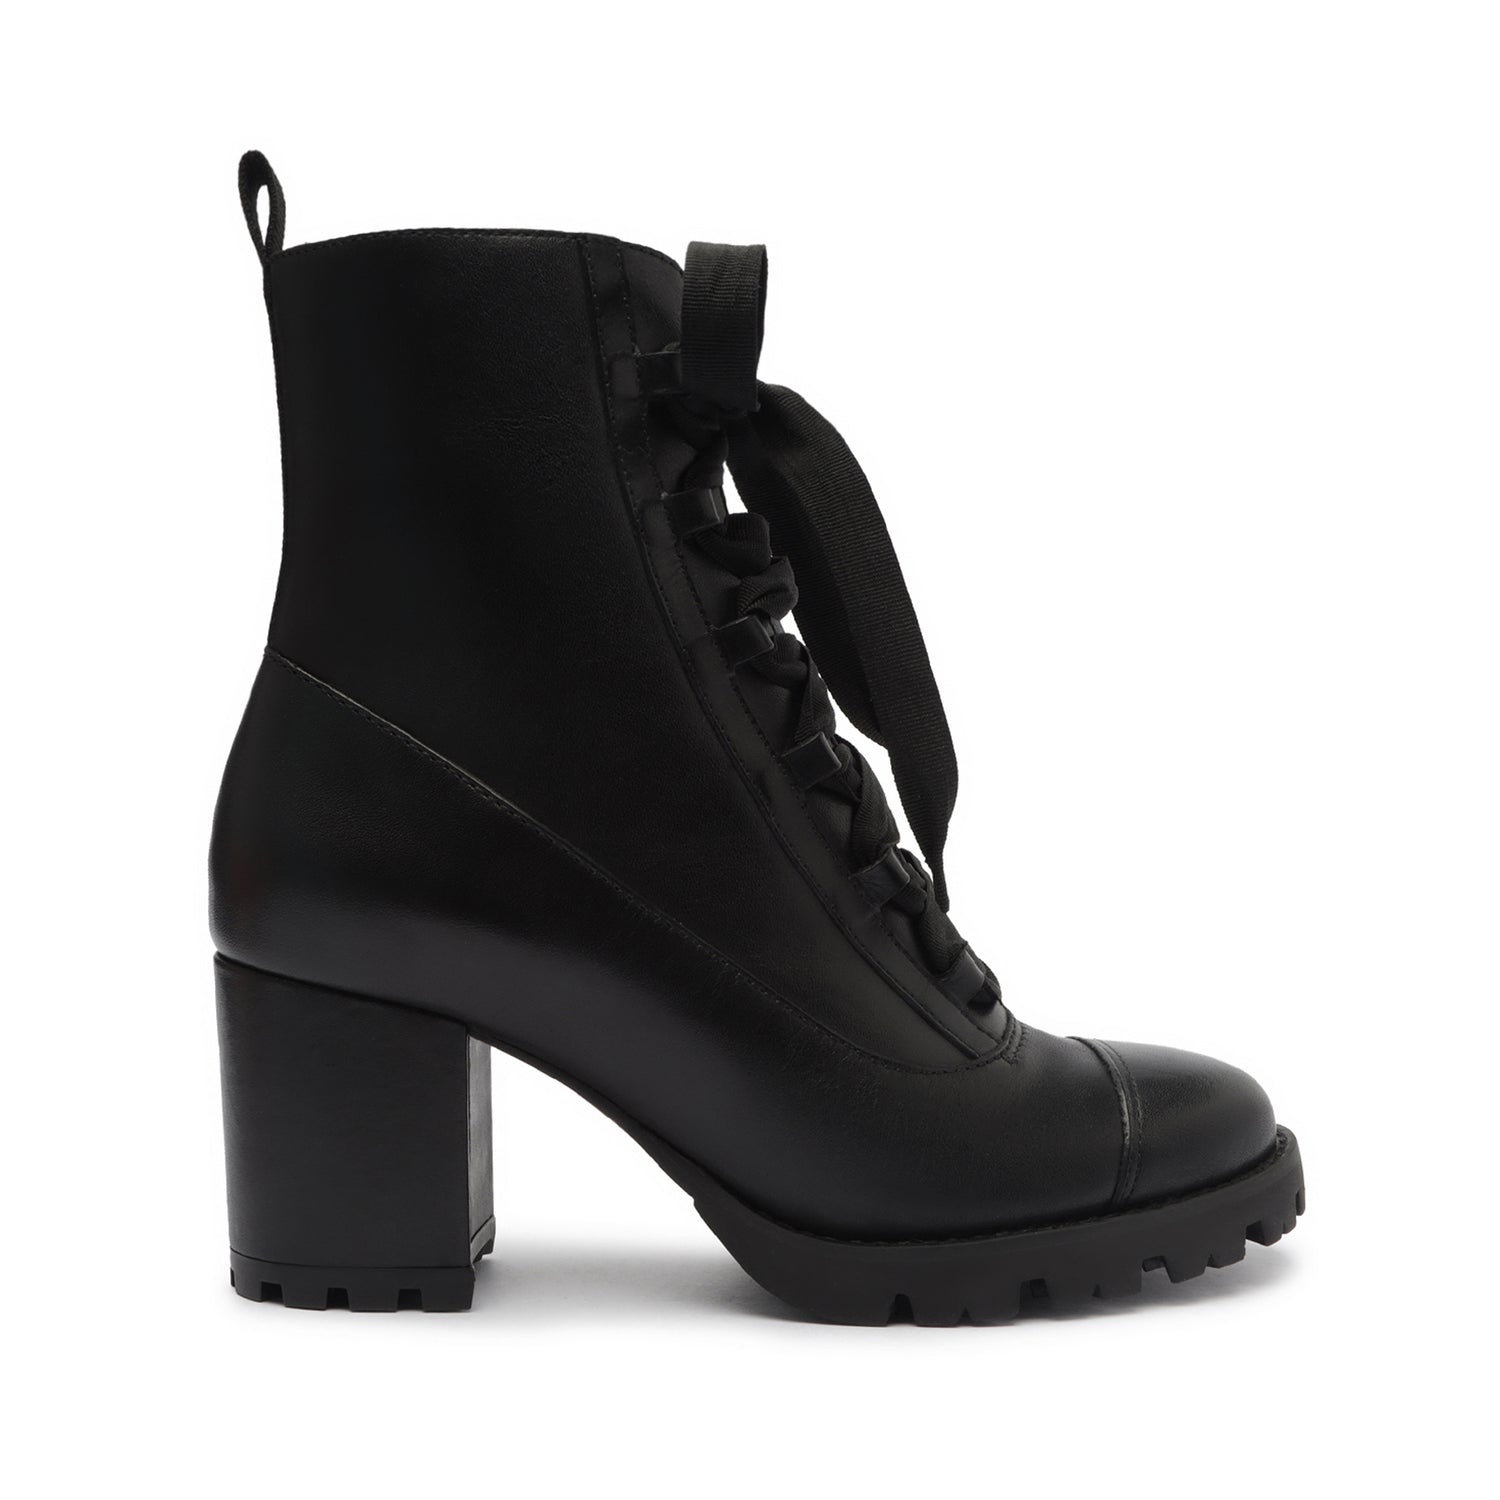 Kaile Mid Leather Bootie Booties Fall 23 5 Black Atanado Prime Leather - Schutz Shoes